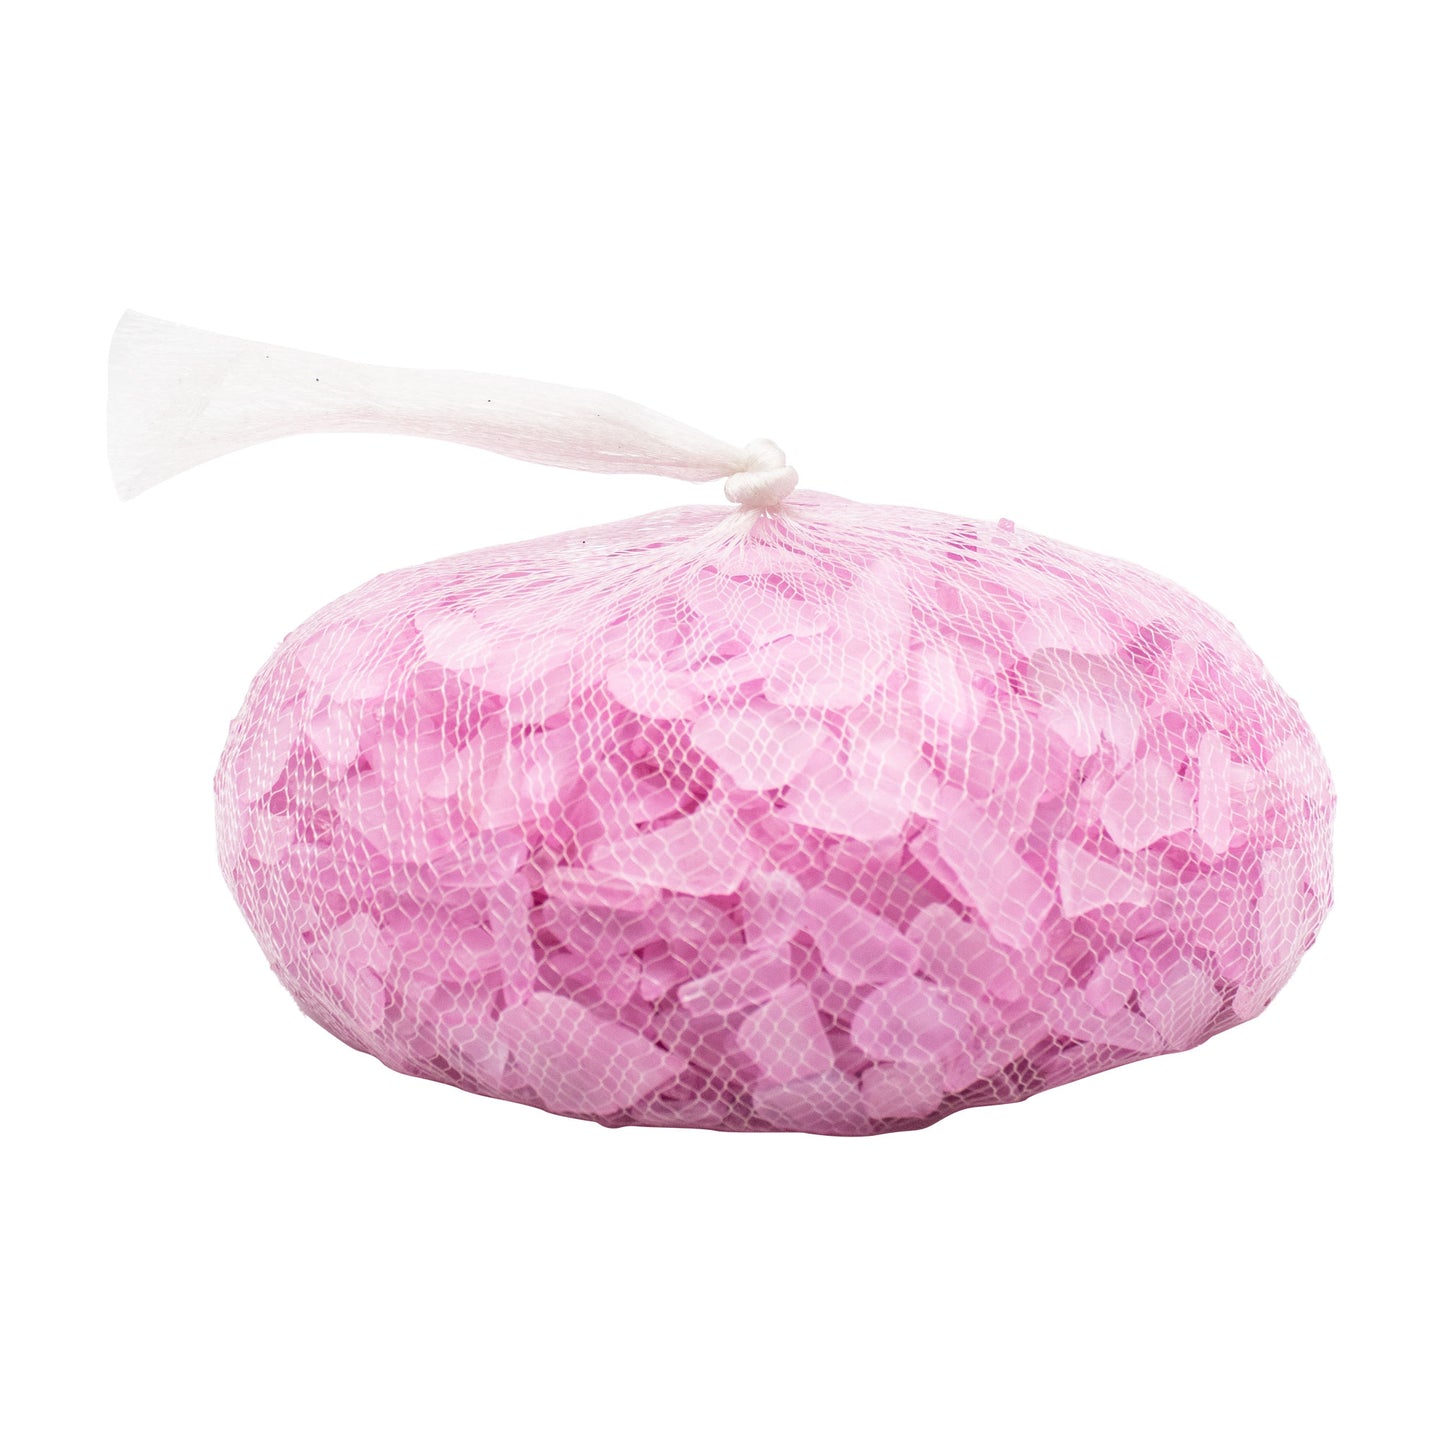 Pink Frosted Sea Glass Pebbles - 4 lb